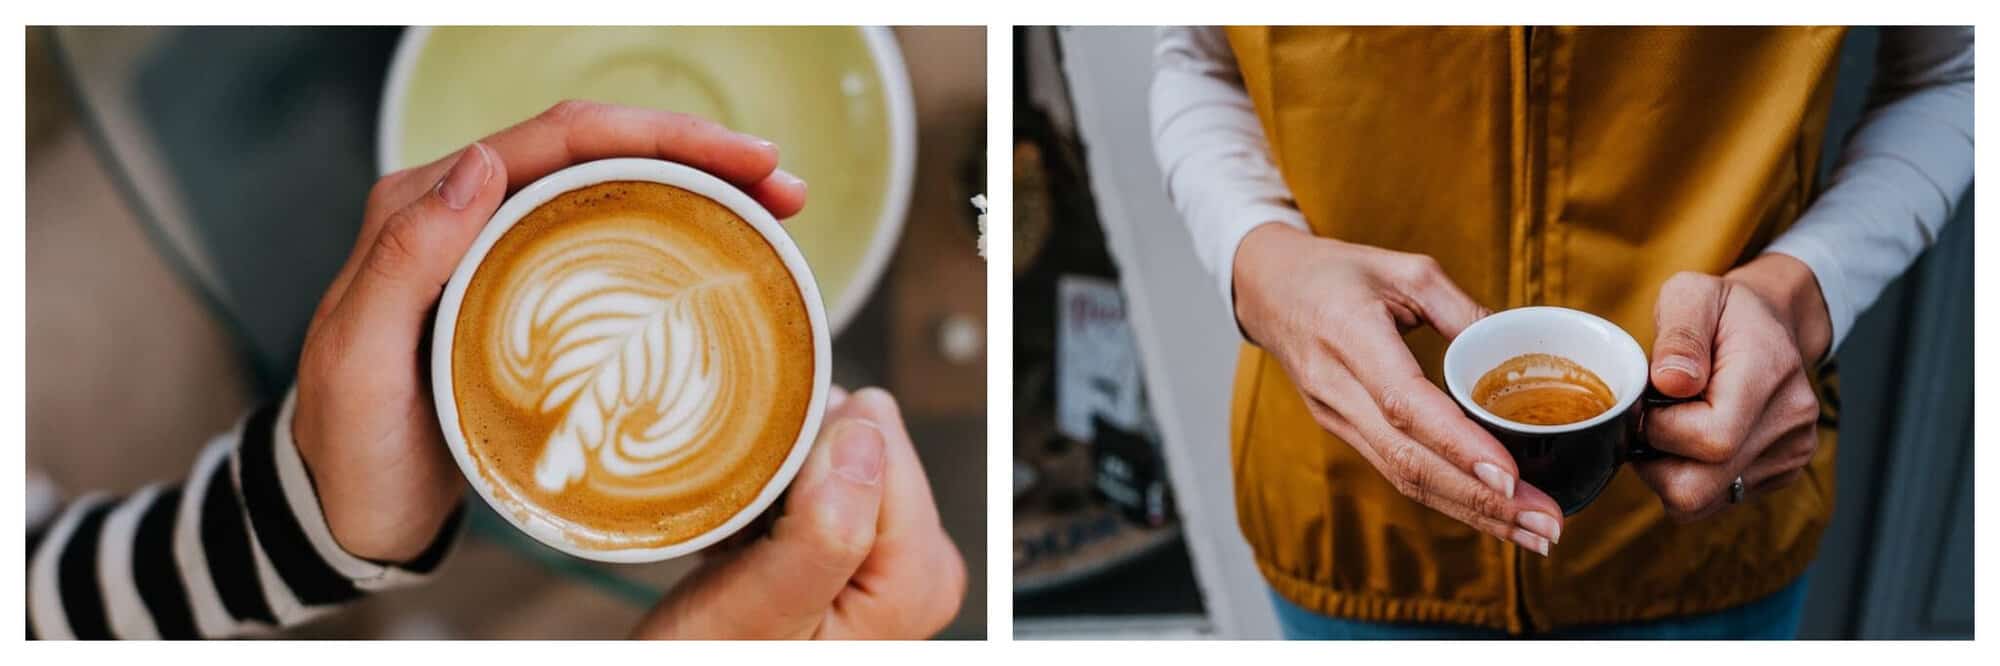 Left: a photo taken from above of a woman holding a latte in a mug. Right: a photo of a woman holding an espresso coffee